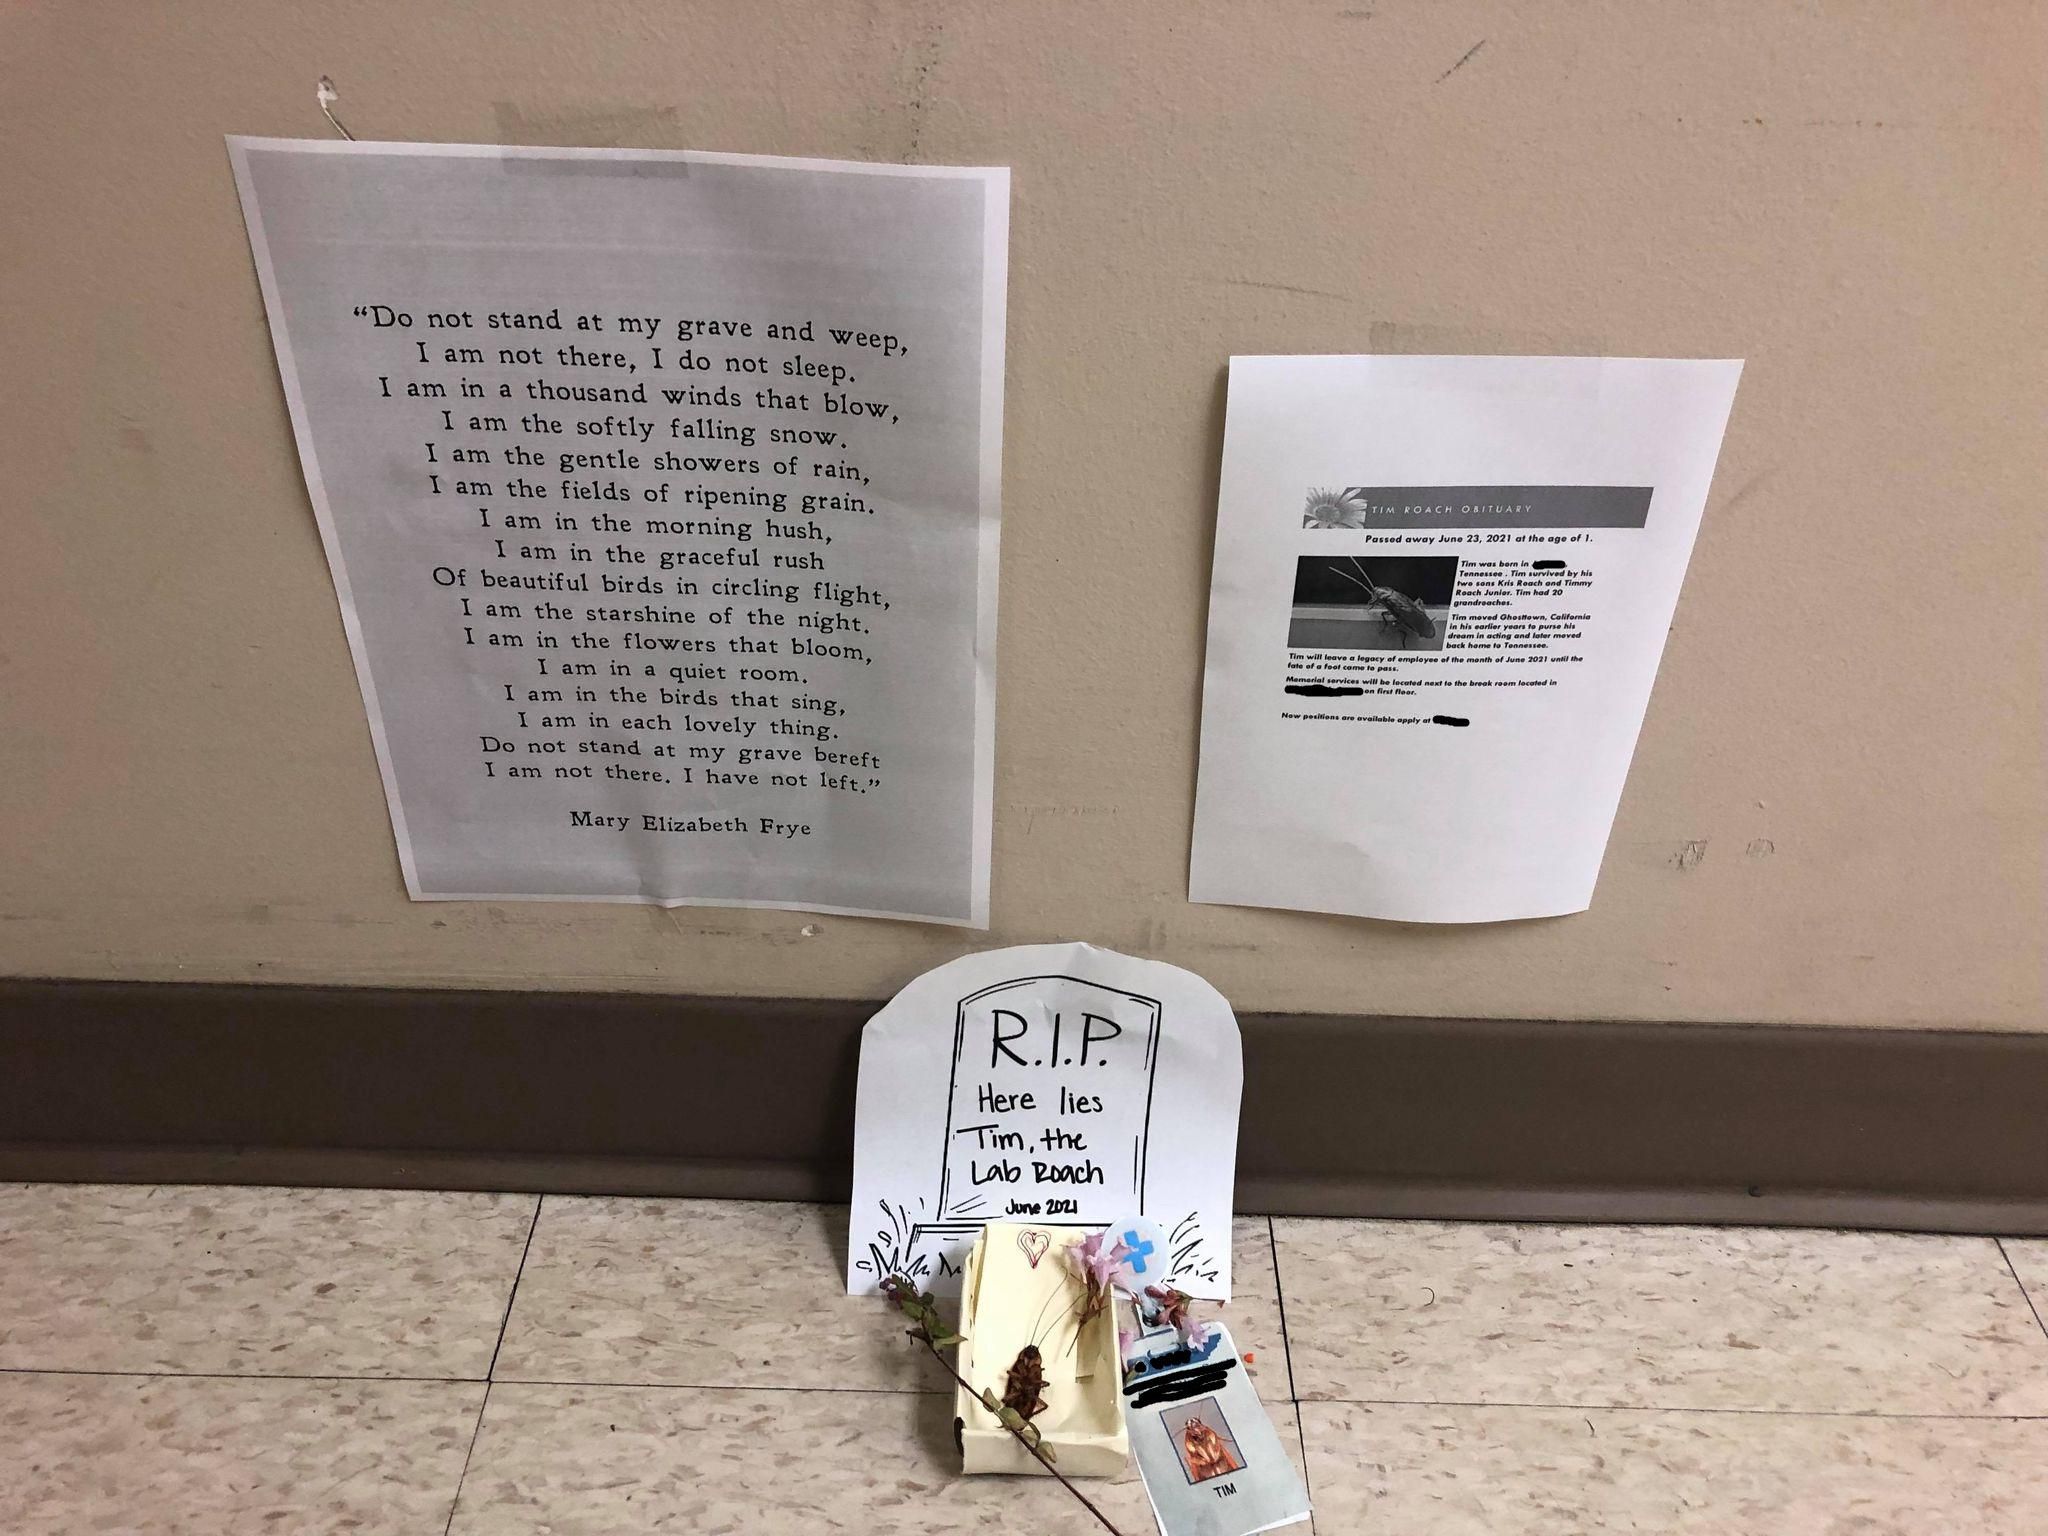 A poor soul passed away outside of the break room today. Employees thought it fitting to honor him as best they could.